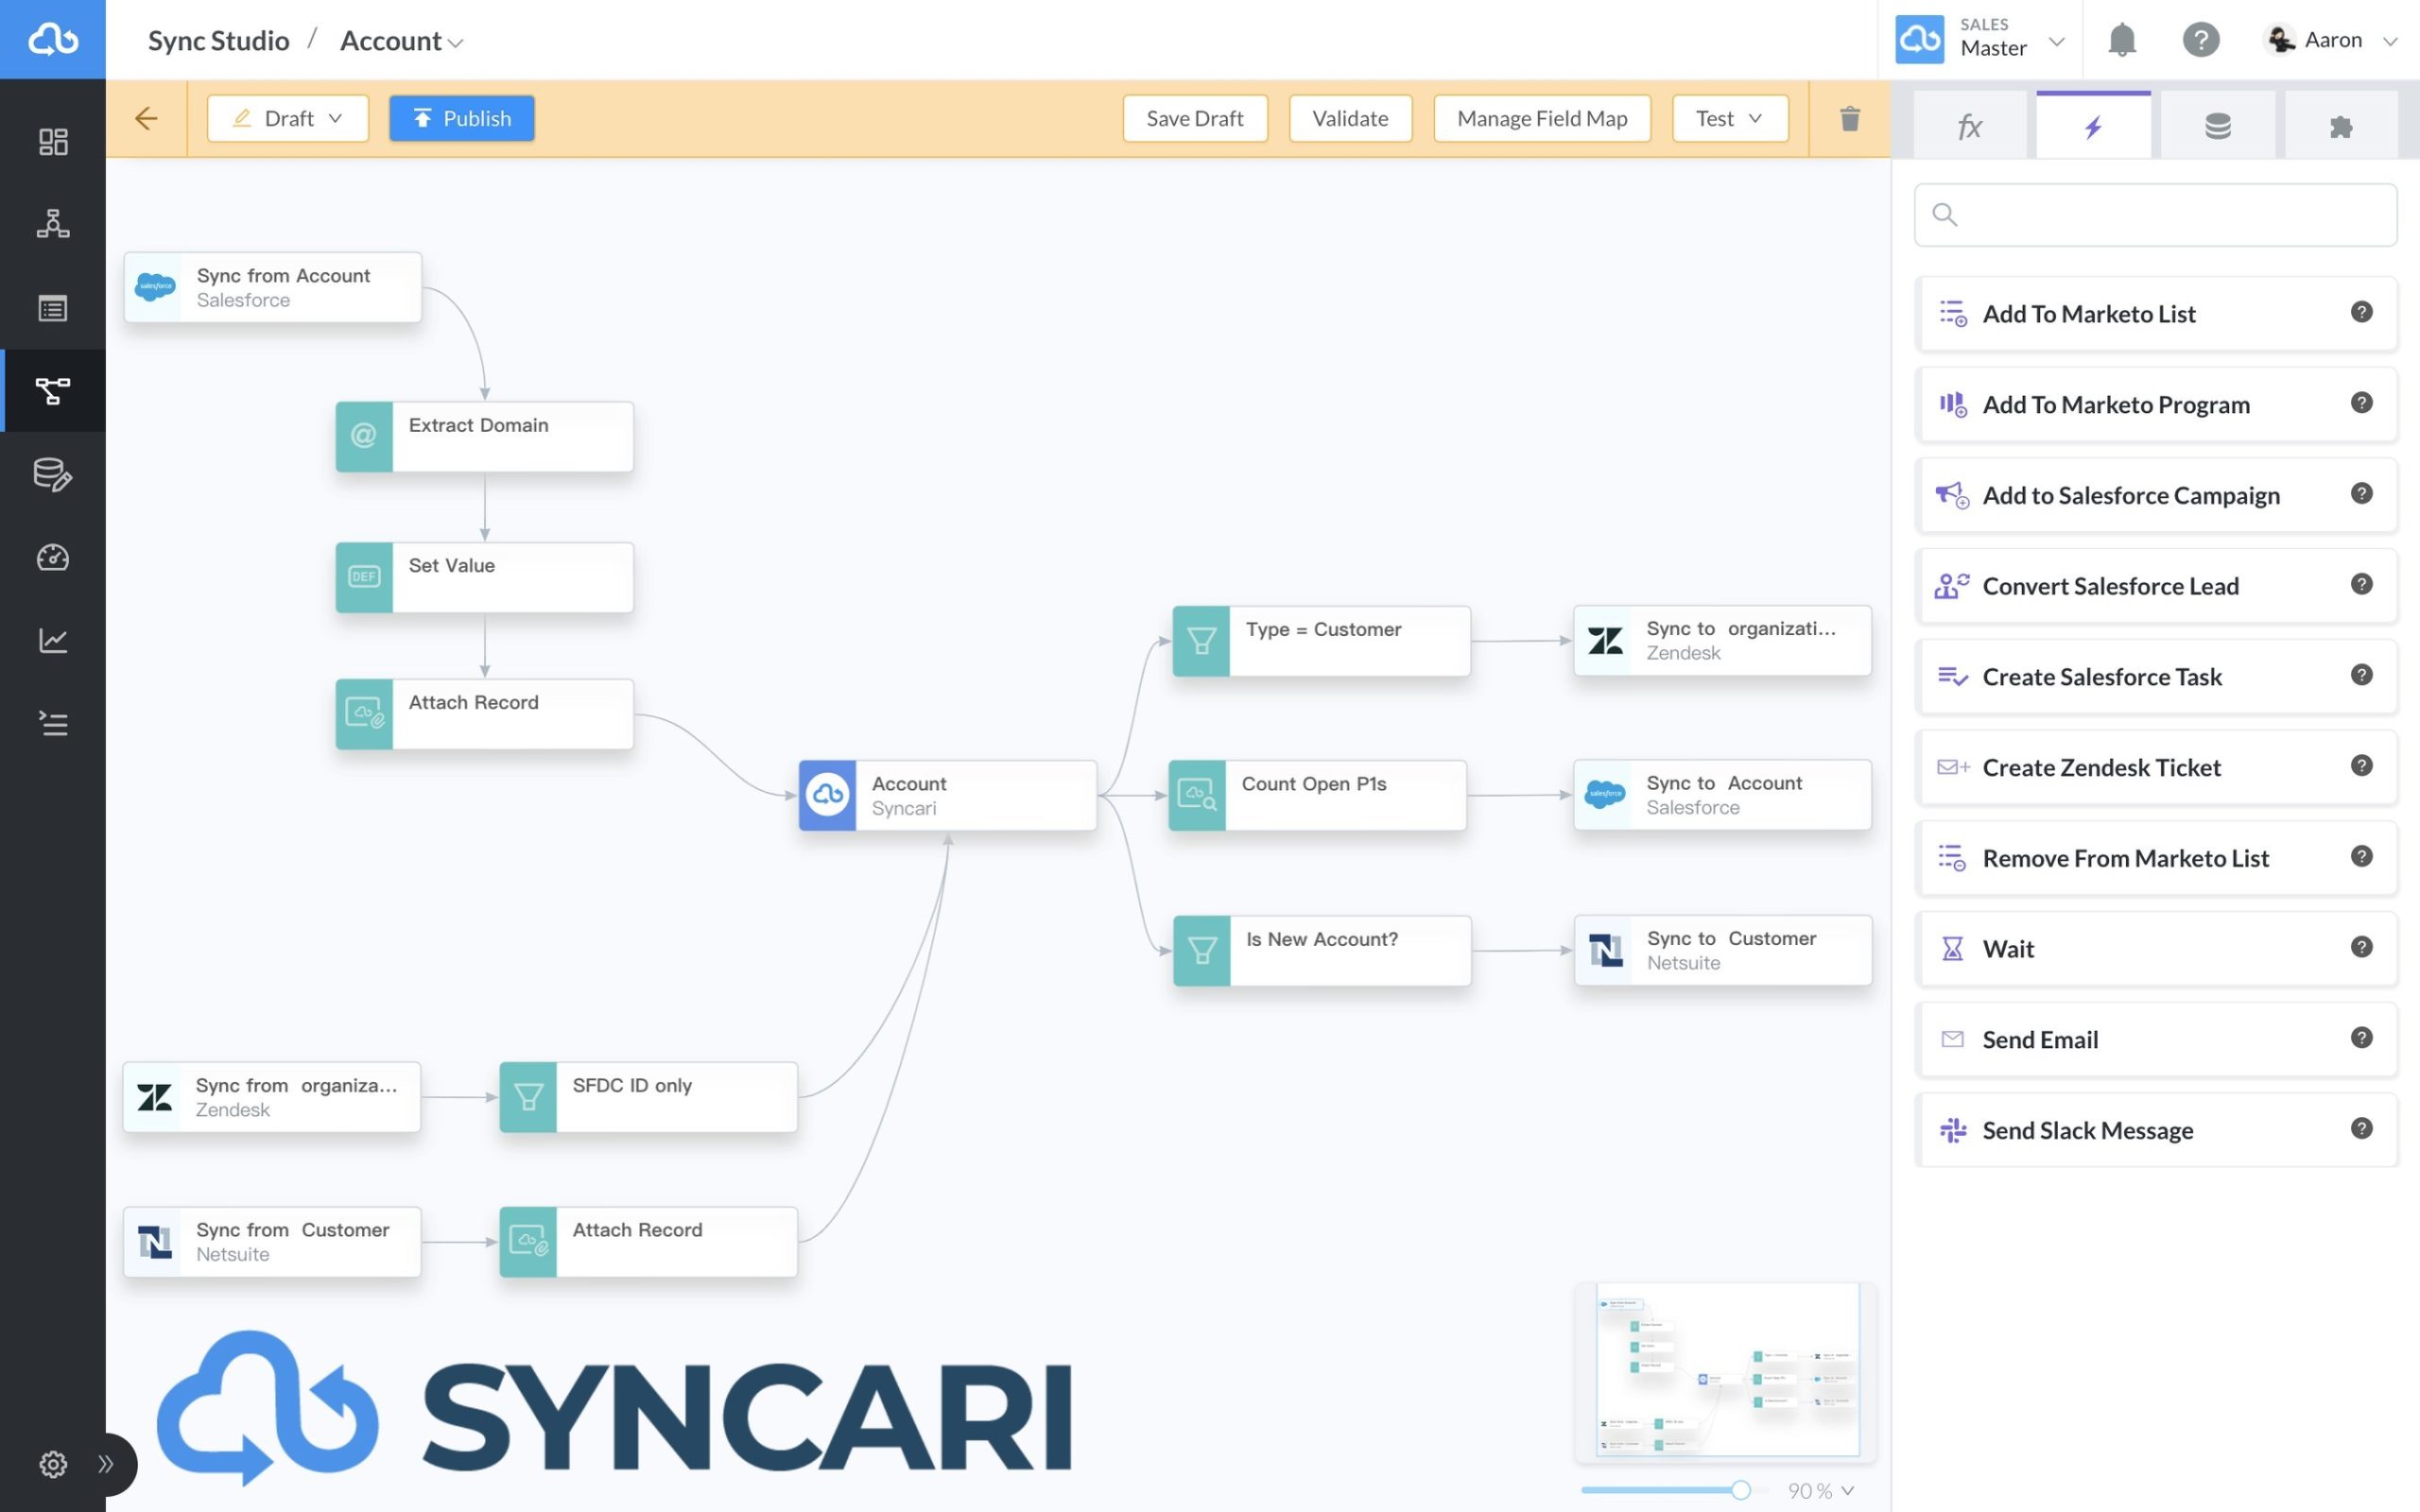 workflow diagram about how Syncari works